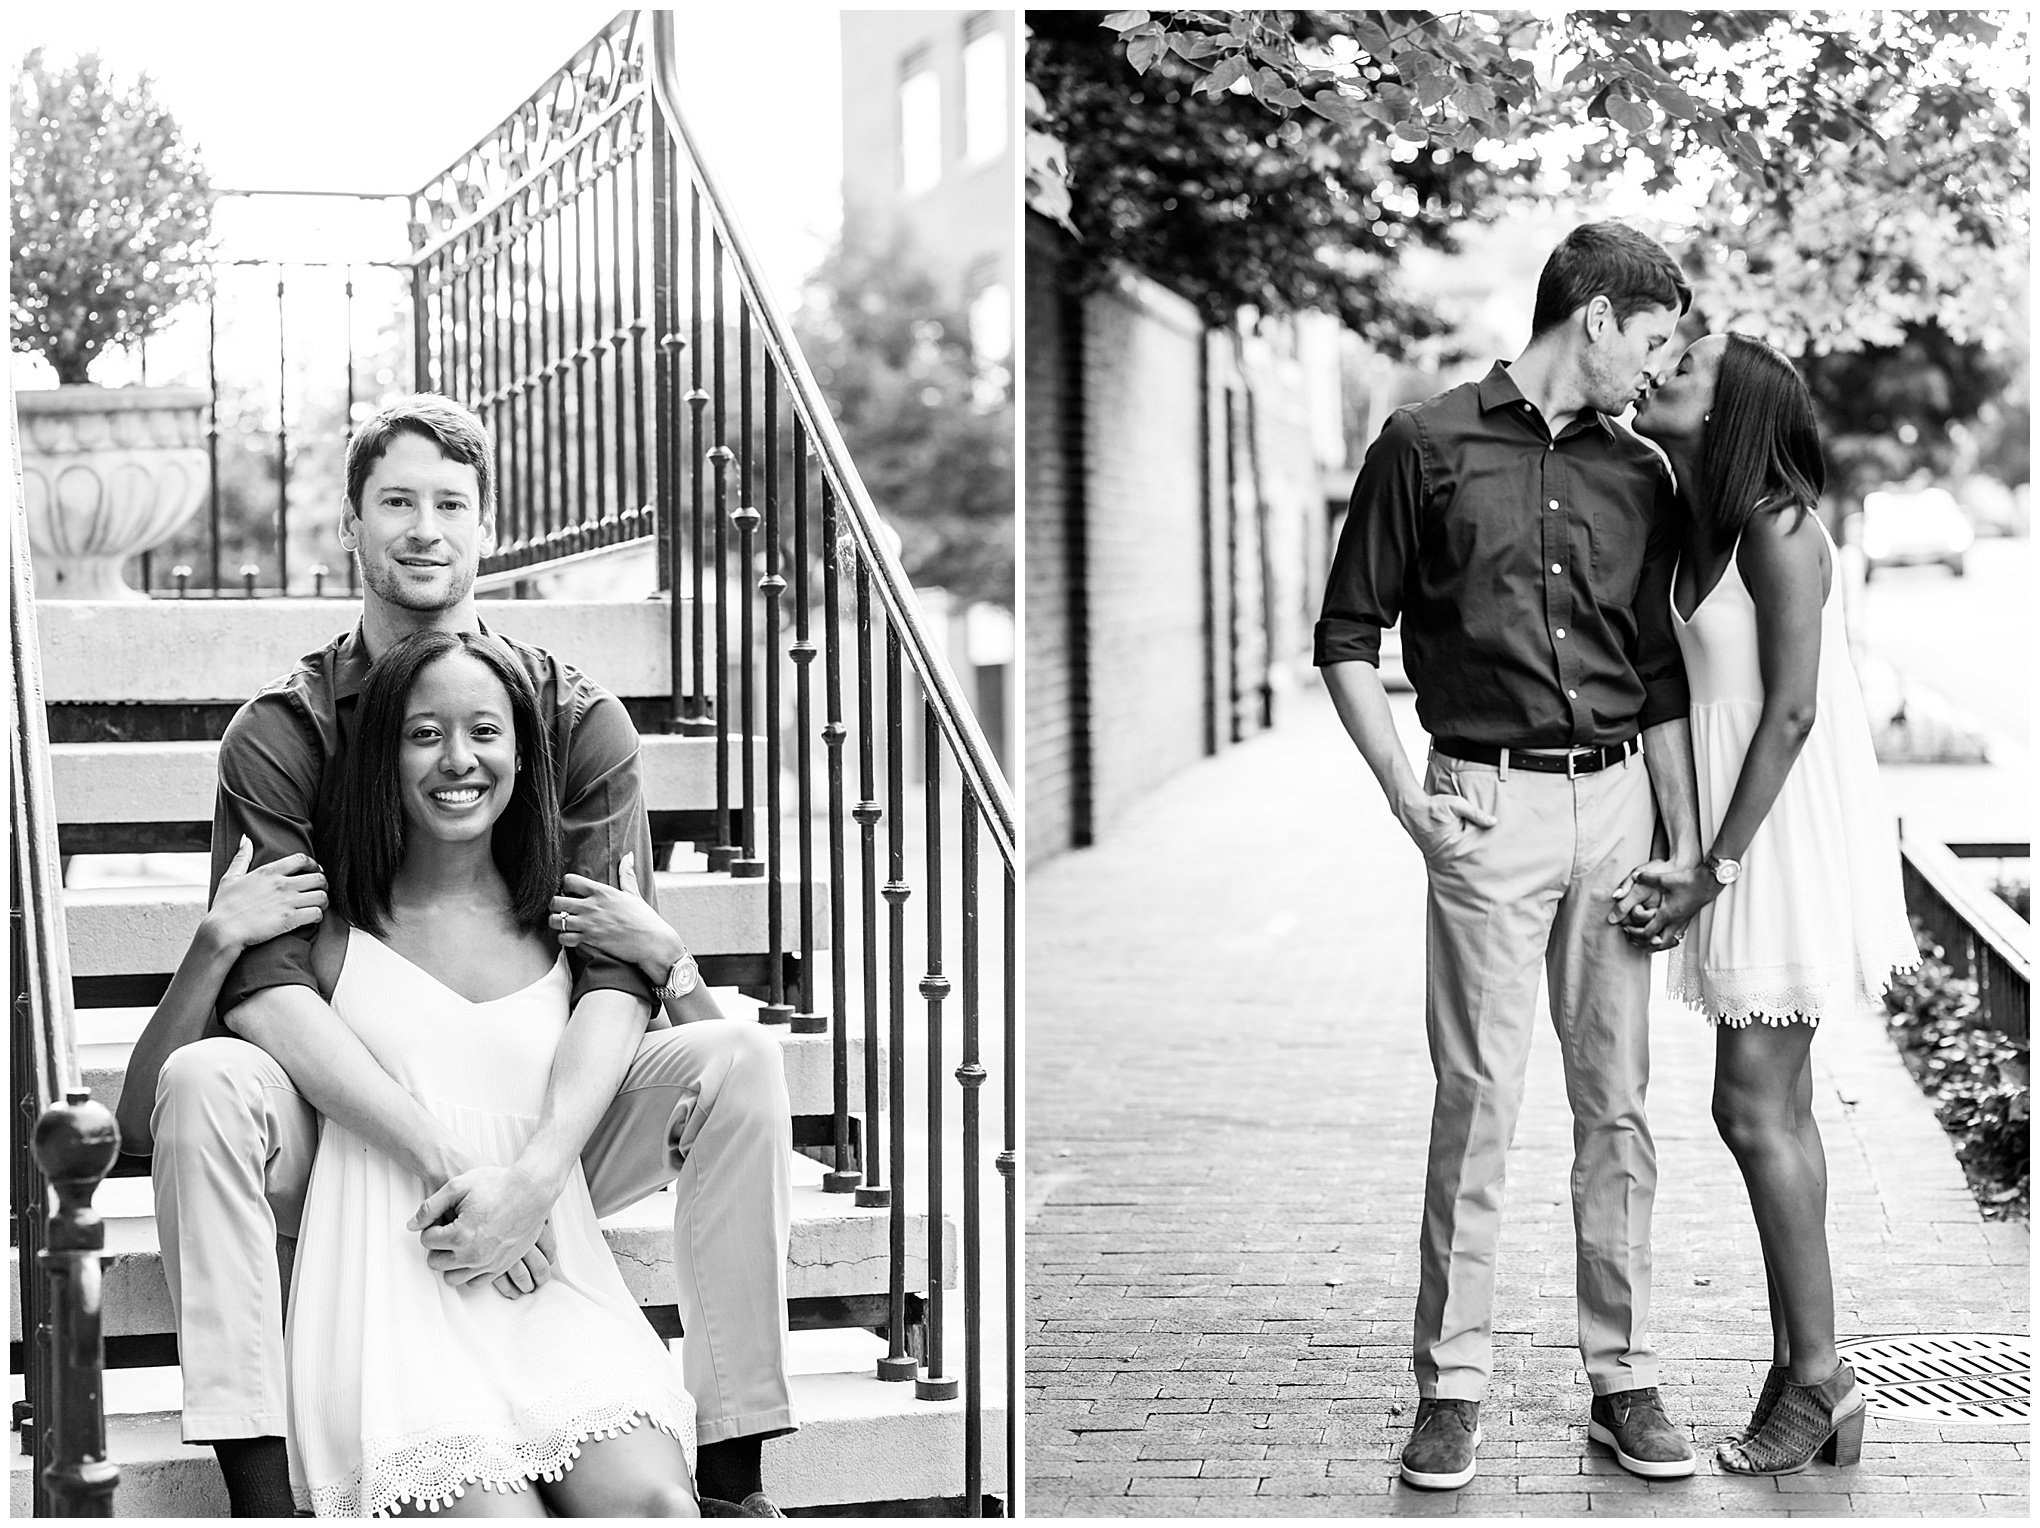 spring Georgetown engagement photos, Georgetown DC. engagement photos, Georgetown engagement photos, D.C. engagement photos, spring engagement photos, Georgetown University engagement photos, Georgetown University, spring portraits, engagement portrraits, engagement session style, summer engagement photos, Rachel E.H. Photography, black and white engagement photos